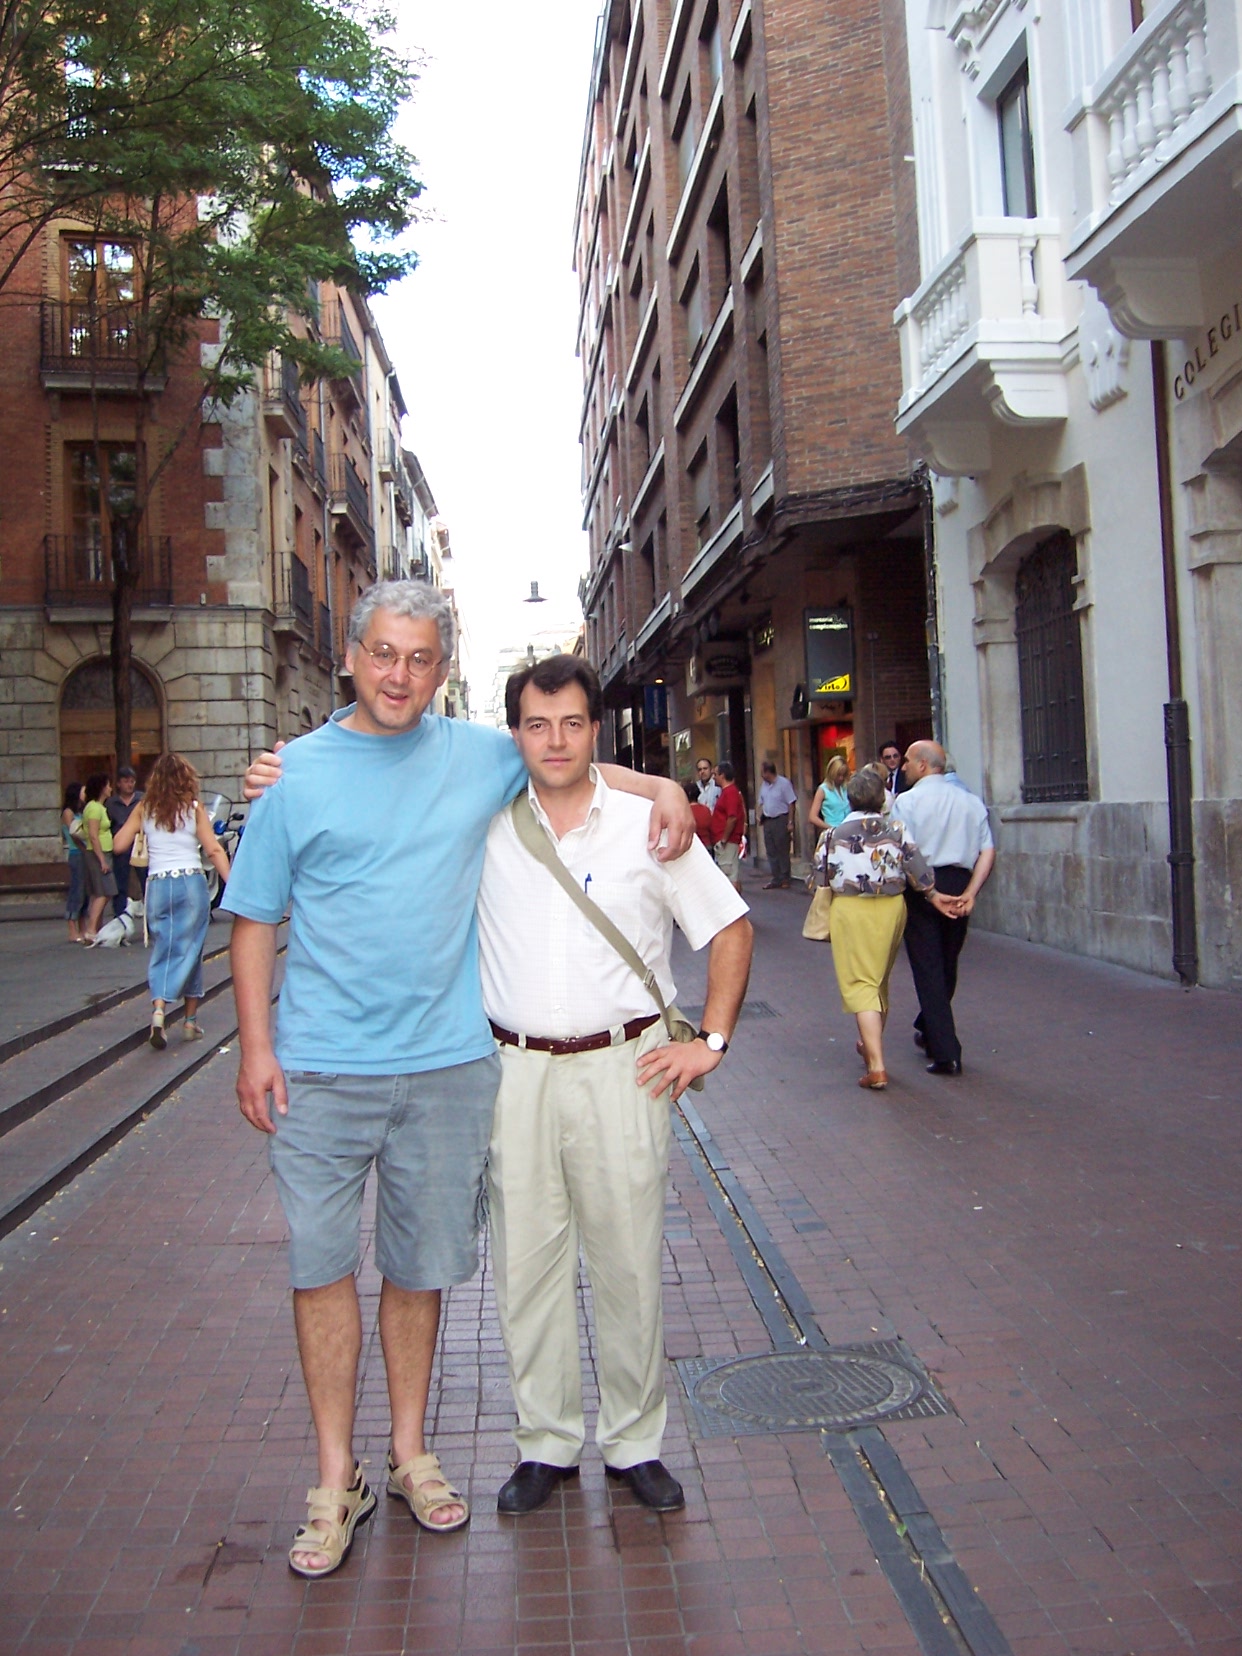 Me and my host in Valladolid, Spain, 2006